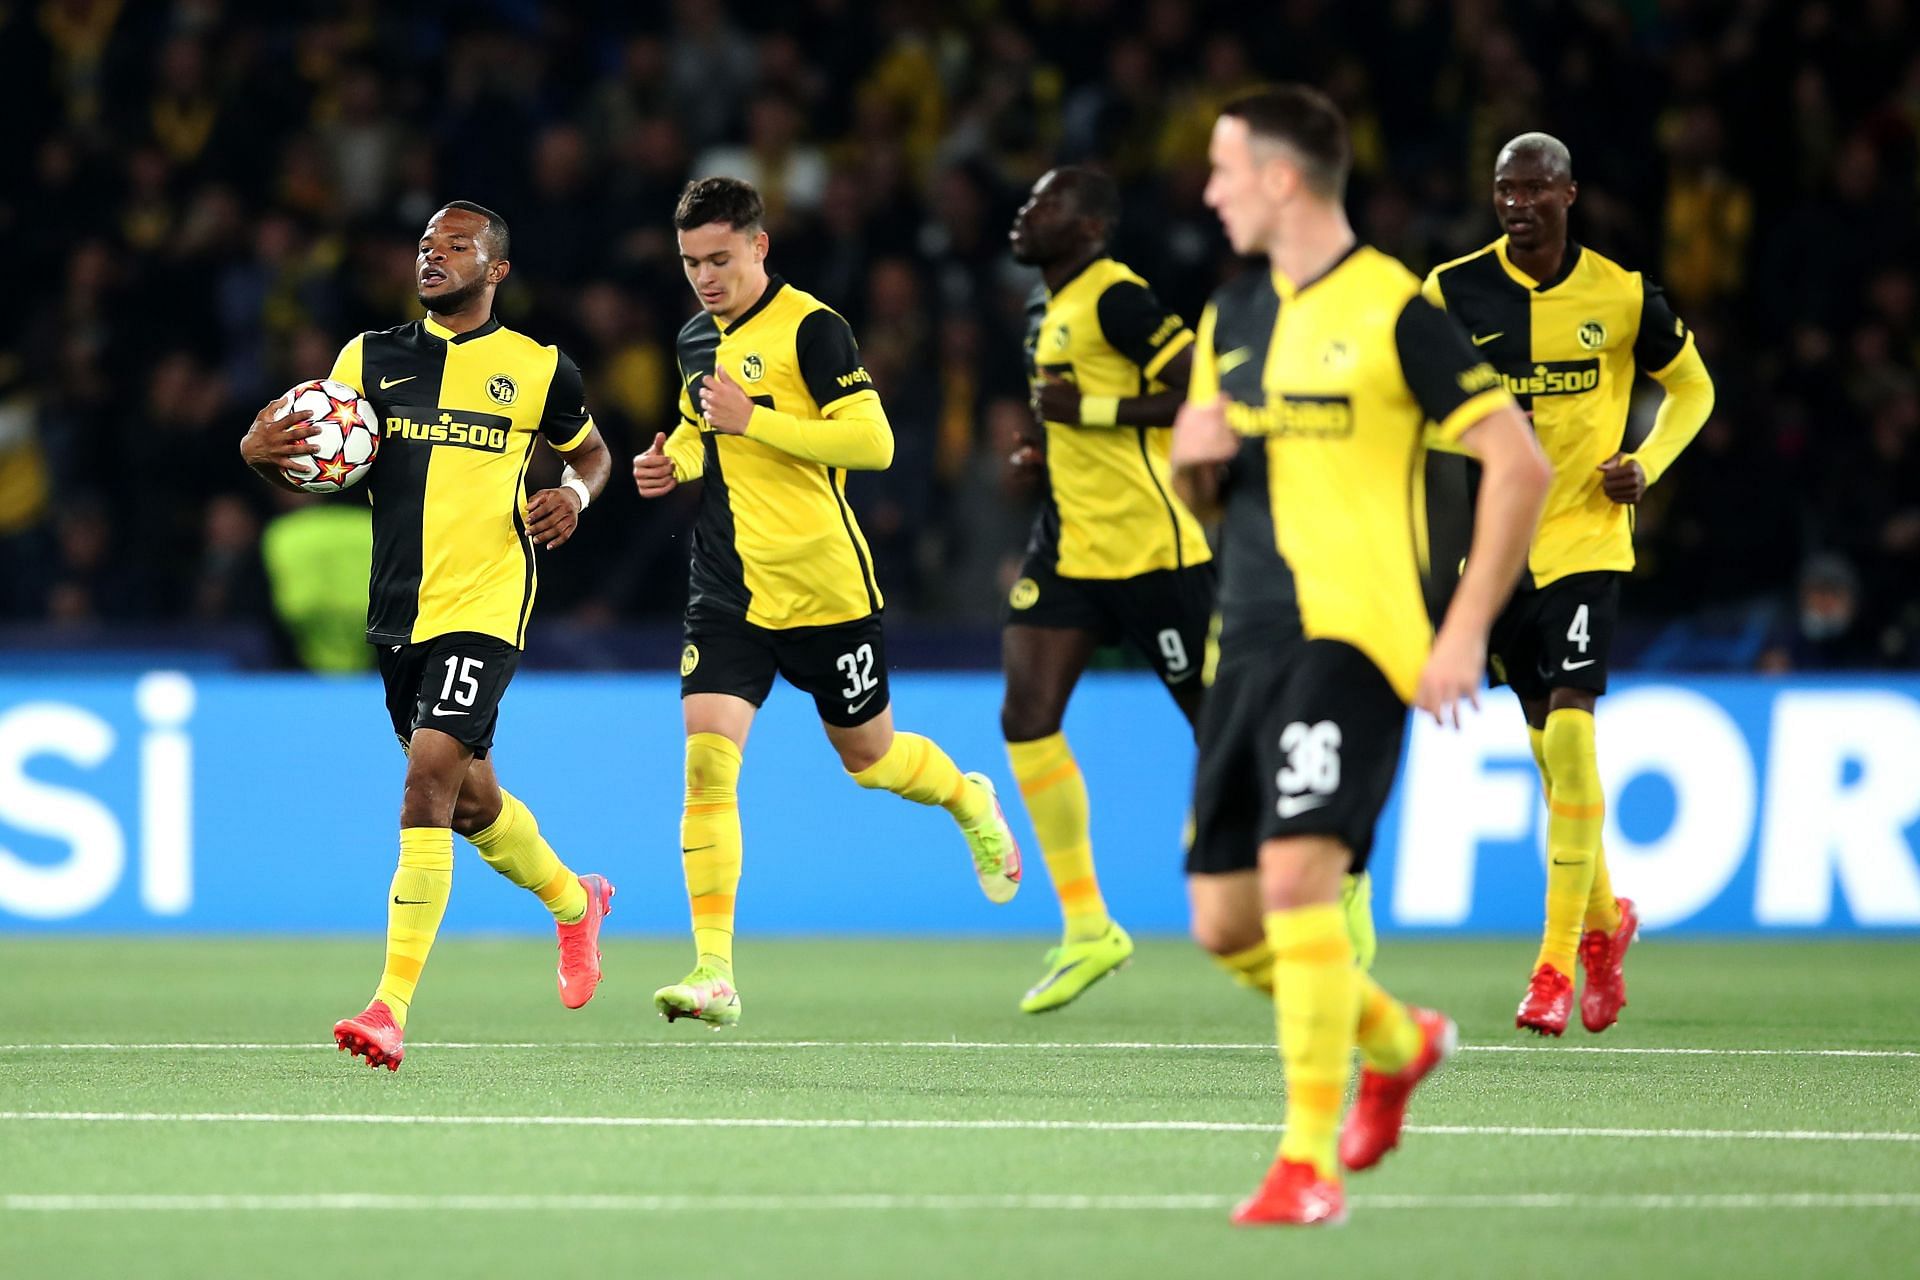 BSC Young Boys will host FC Zurich on Saturday